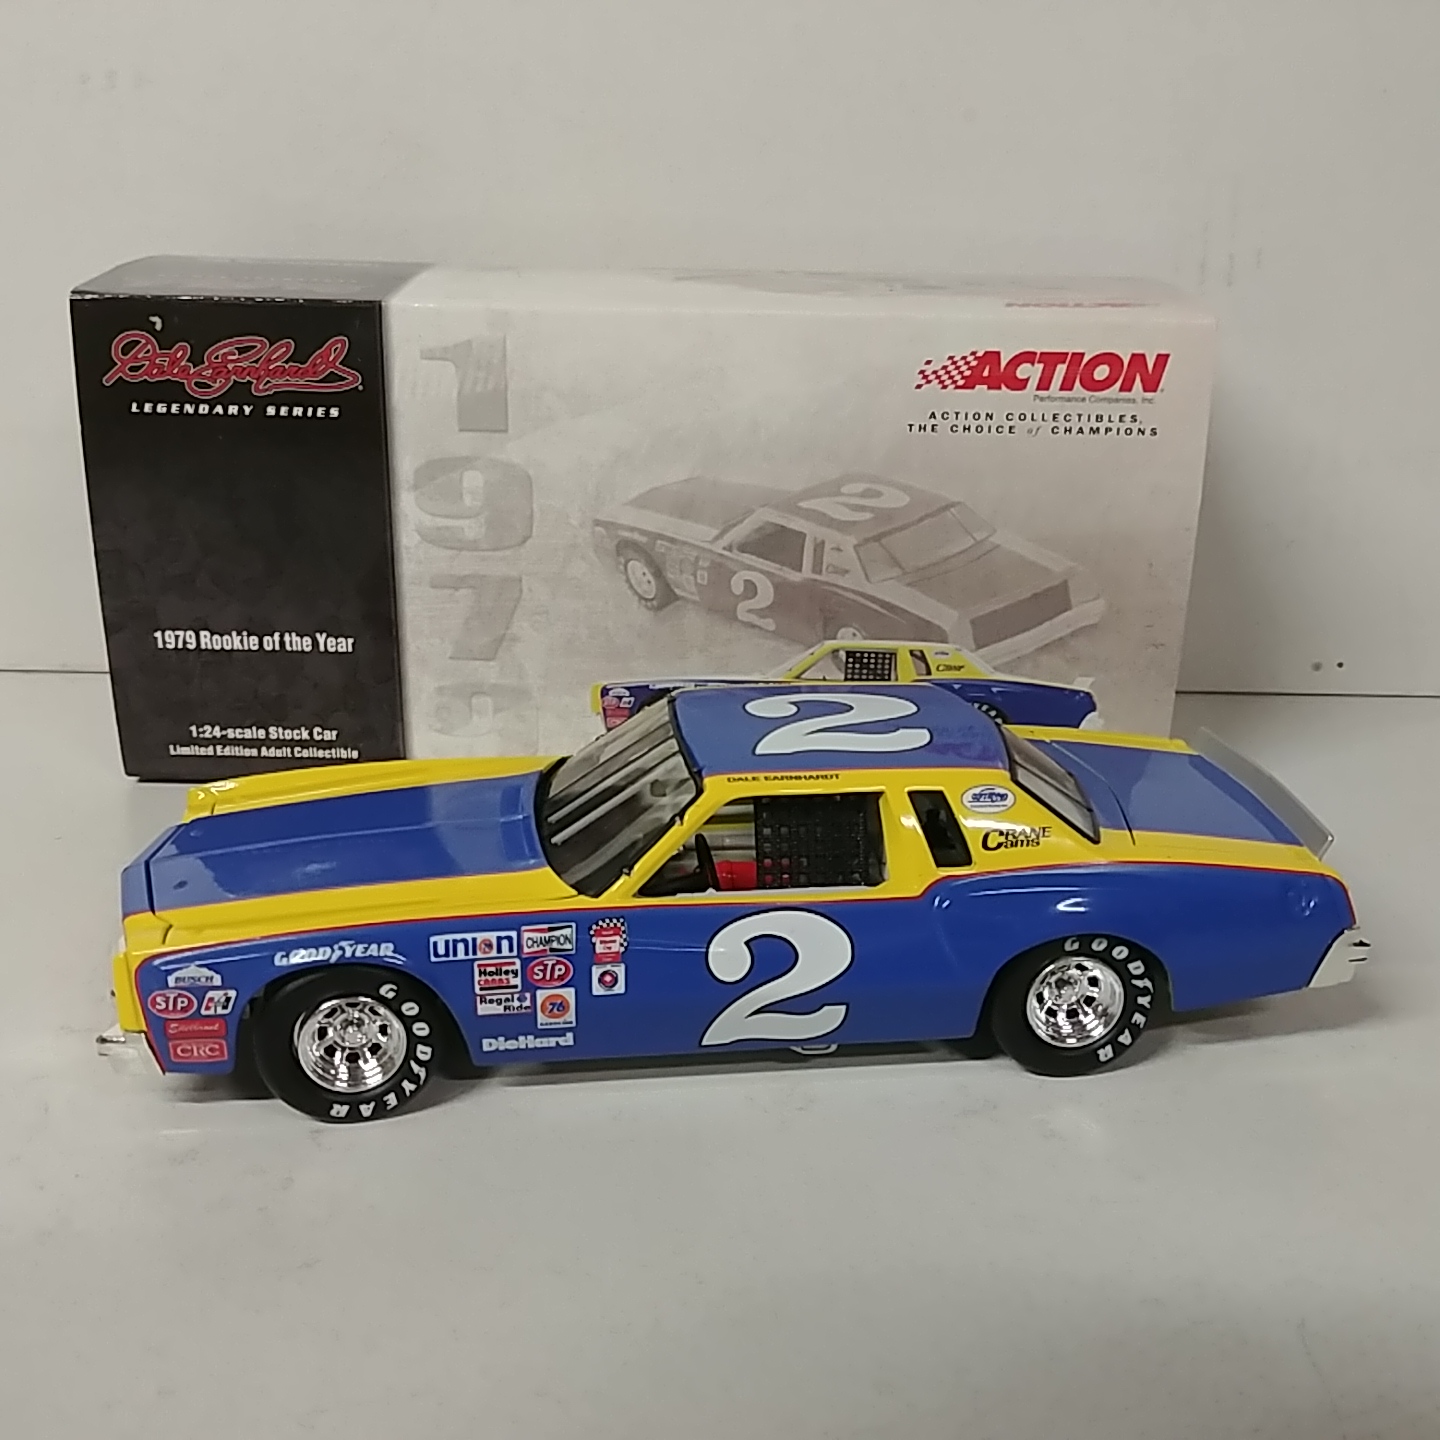 1979 Dale Earnhardt 1/24th  "Rookie of the Year"  Monte Carlo c/w car